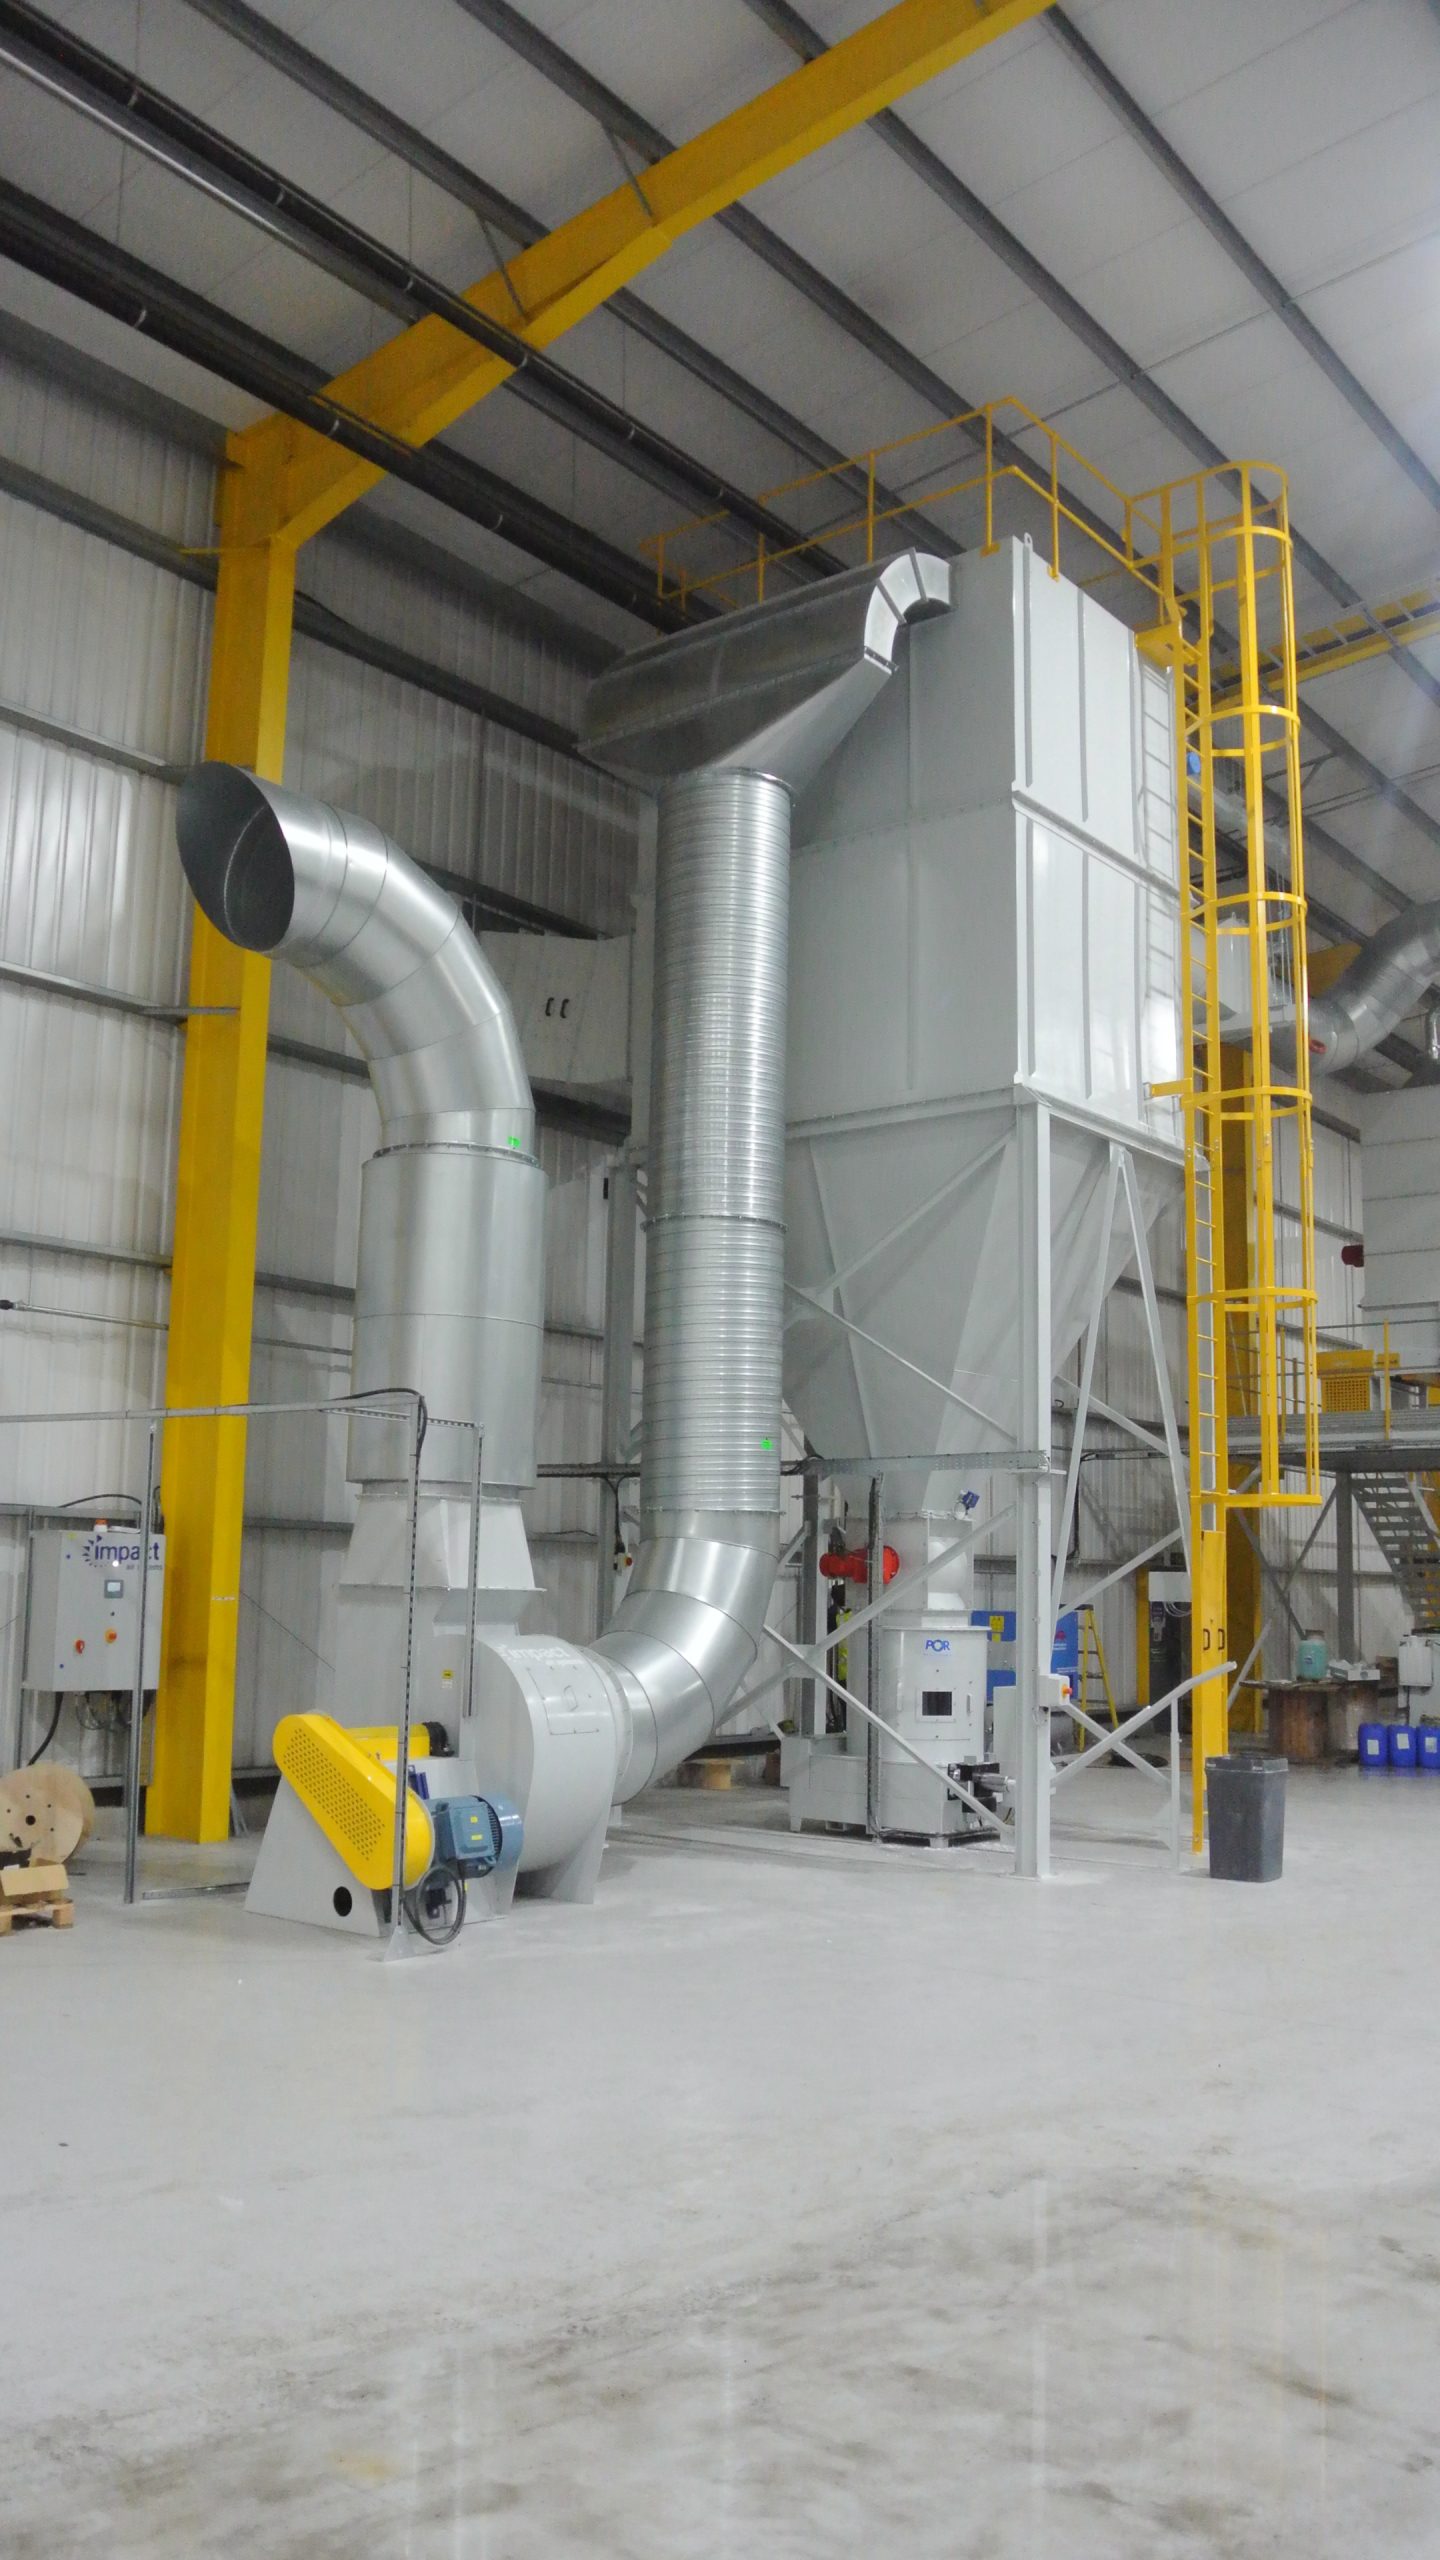 Major central dust control system and waste management facility